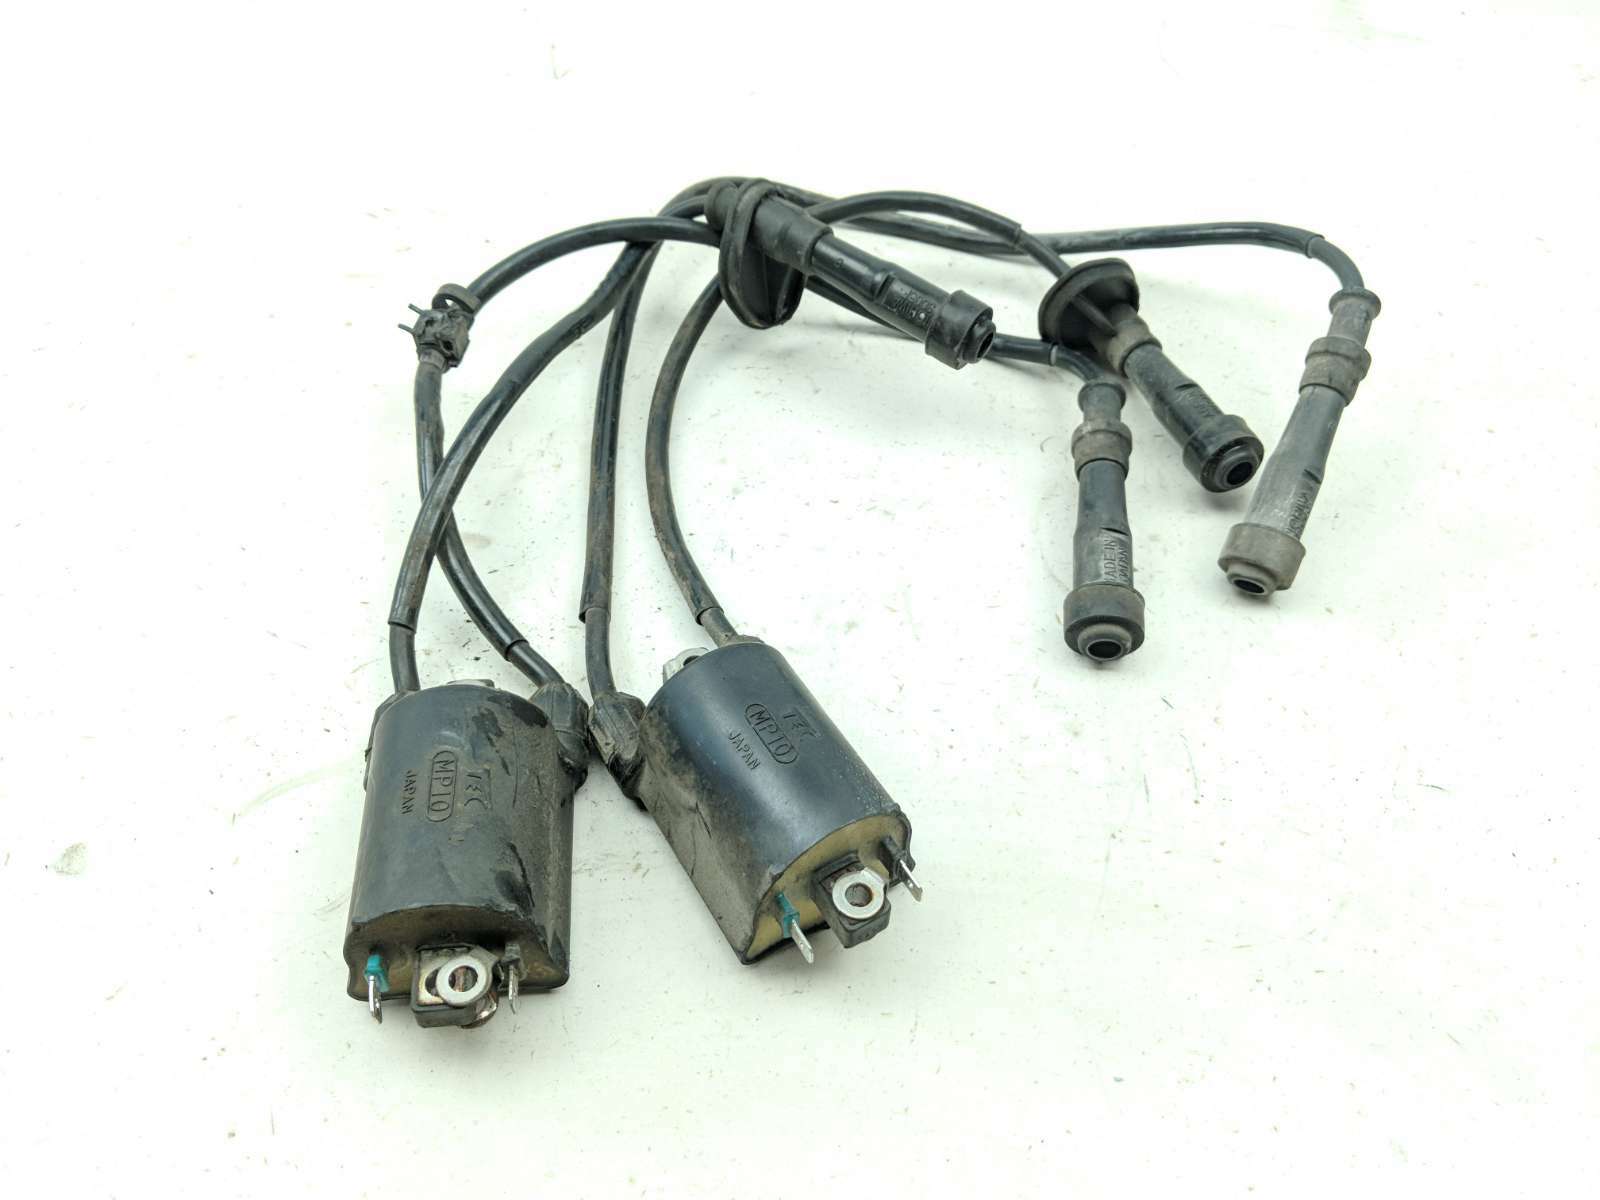 01 Honda VT750CD Shadow ACE Ignition Coil Plug Pack